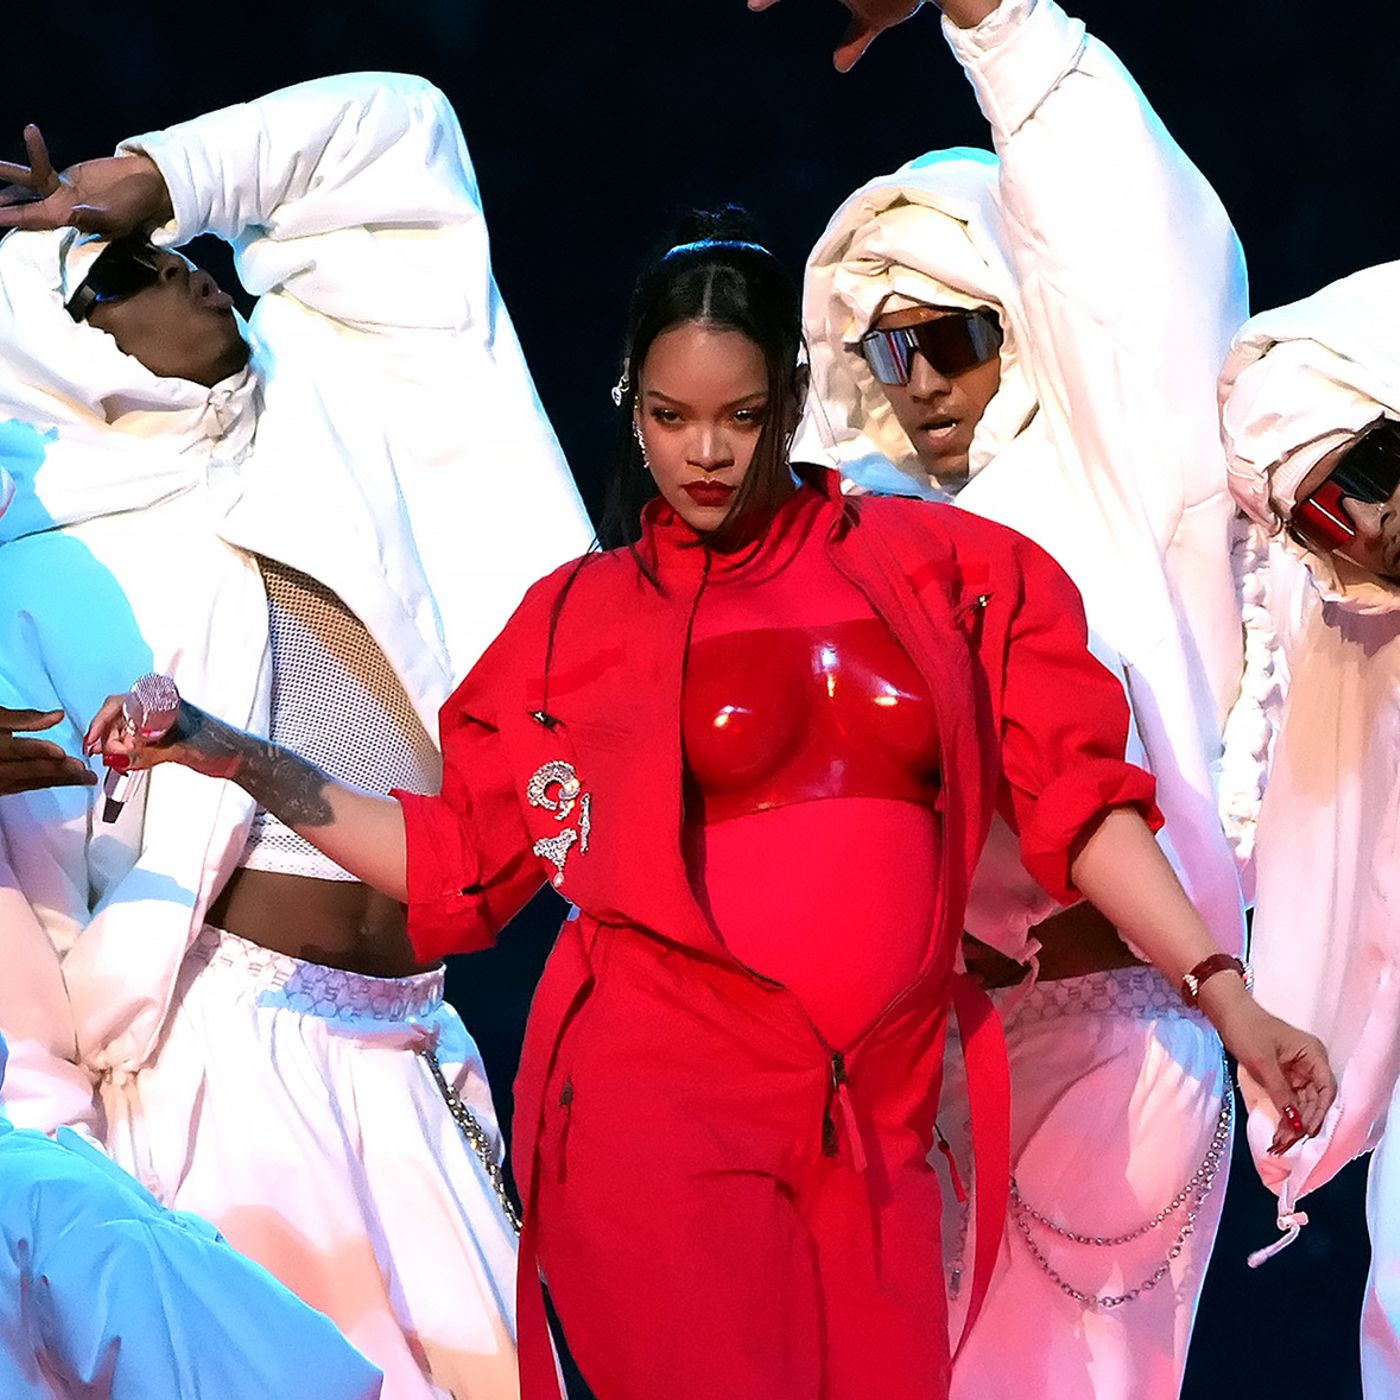 S11 Ep116: 02/13/23 - Rihanna's Baby Bump Won the Super Bowl & A Pastor Goes Off About Beyonce Tour